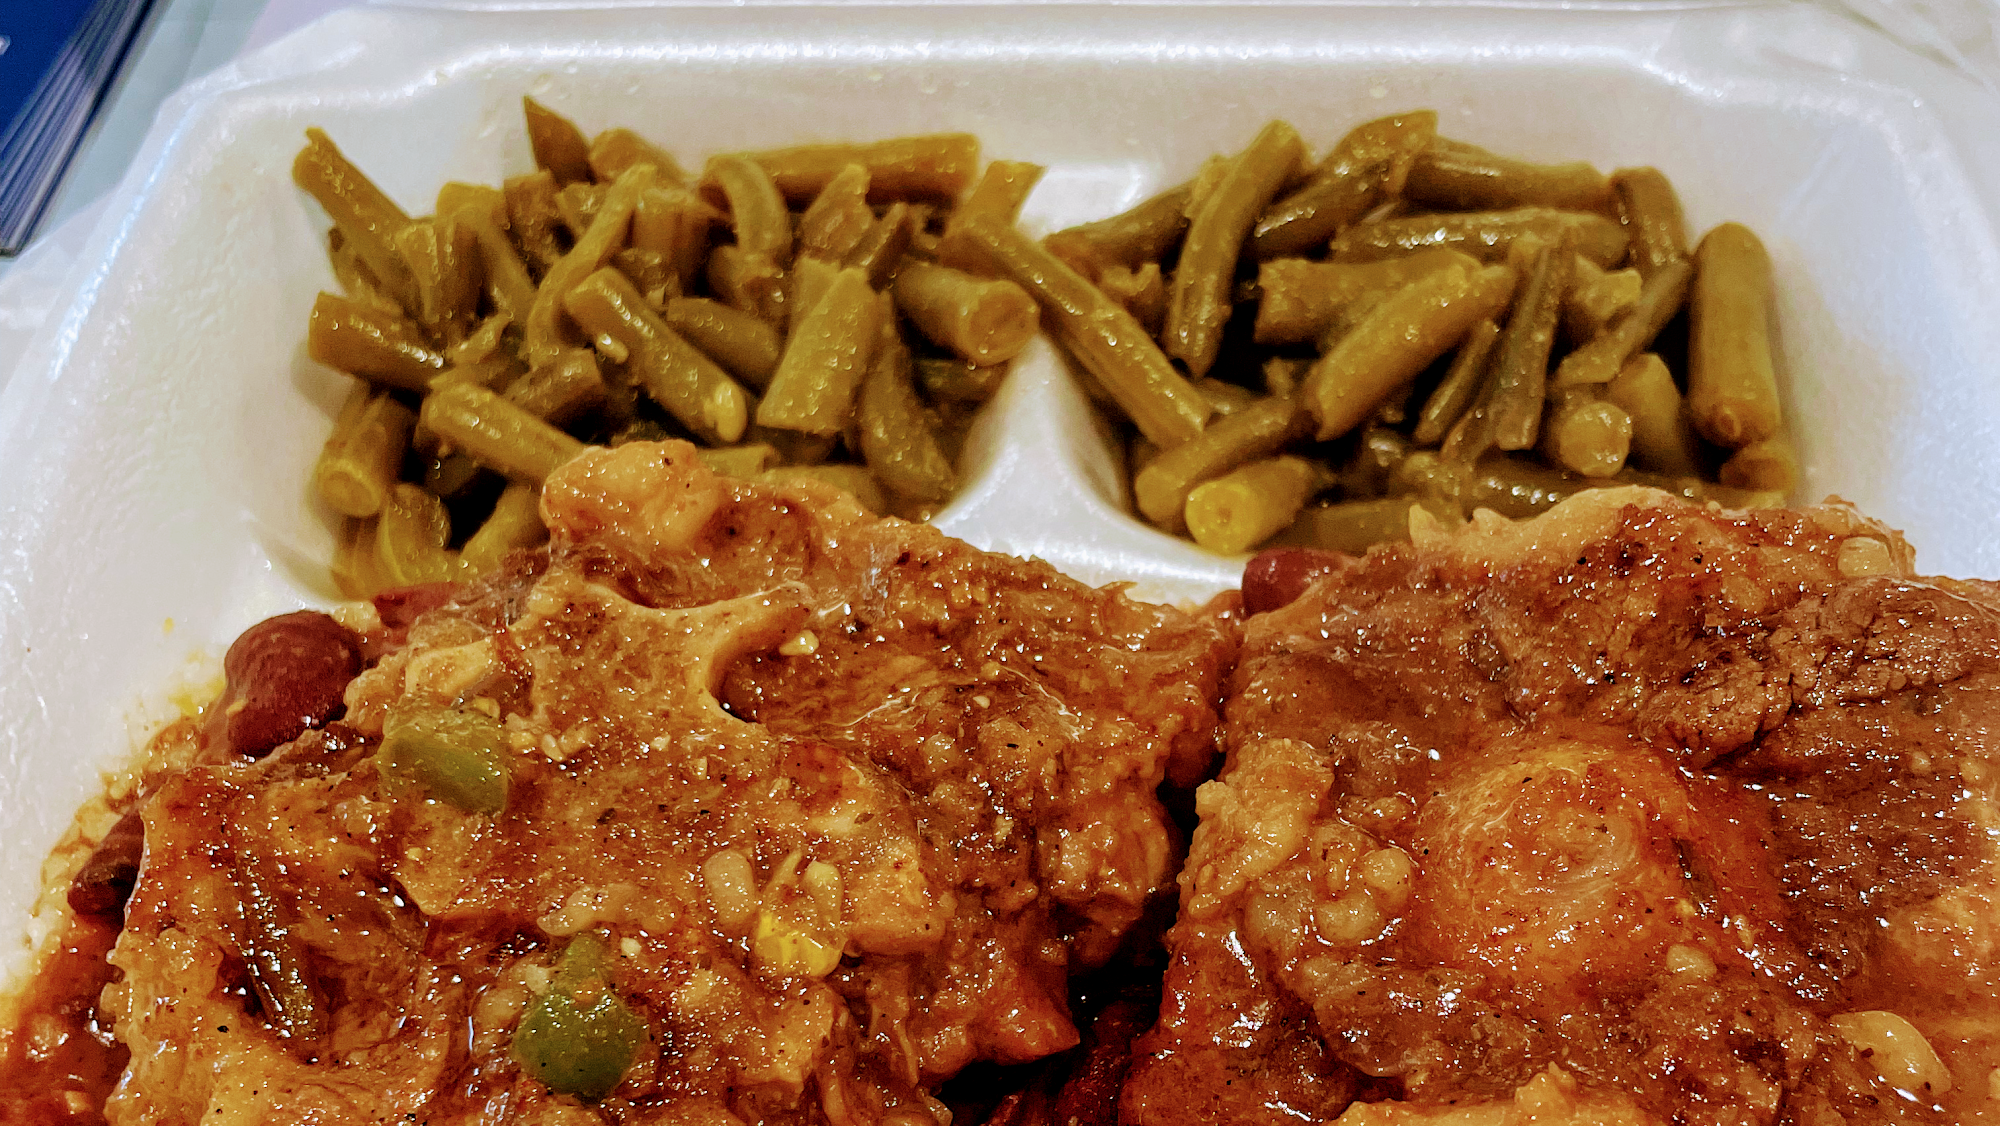 KeKe's Chicken and Soul Food